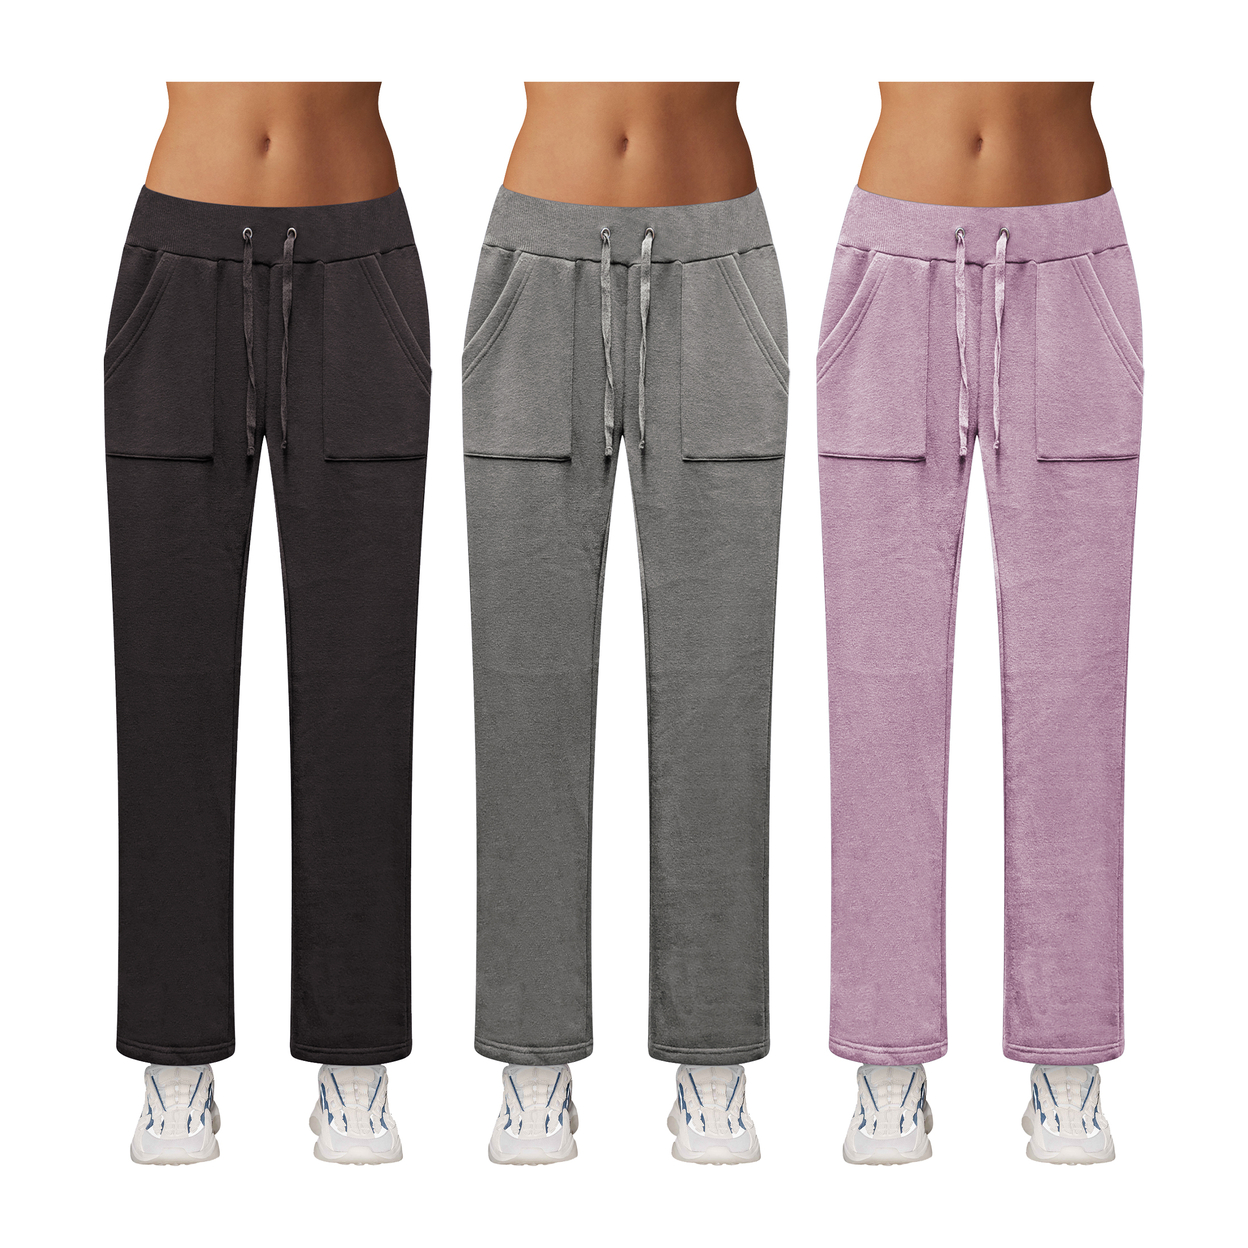 3-Pack: Women's Ultra-Soft Cozy Fleece Lined Elastic Waistband Terry Knit Pants - X-large